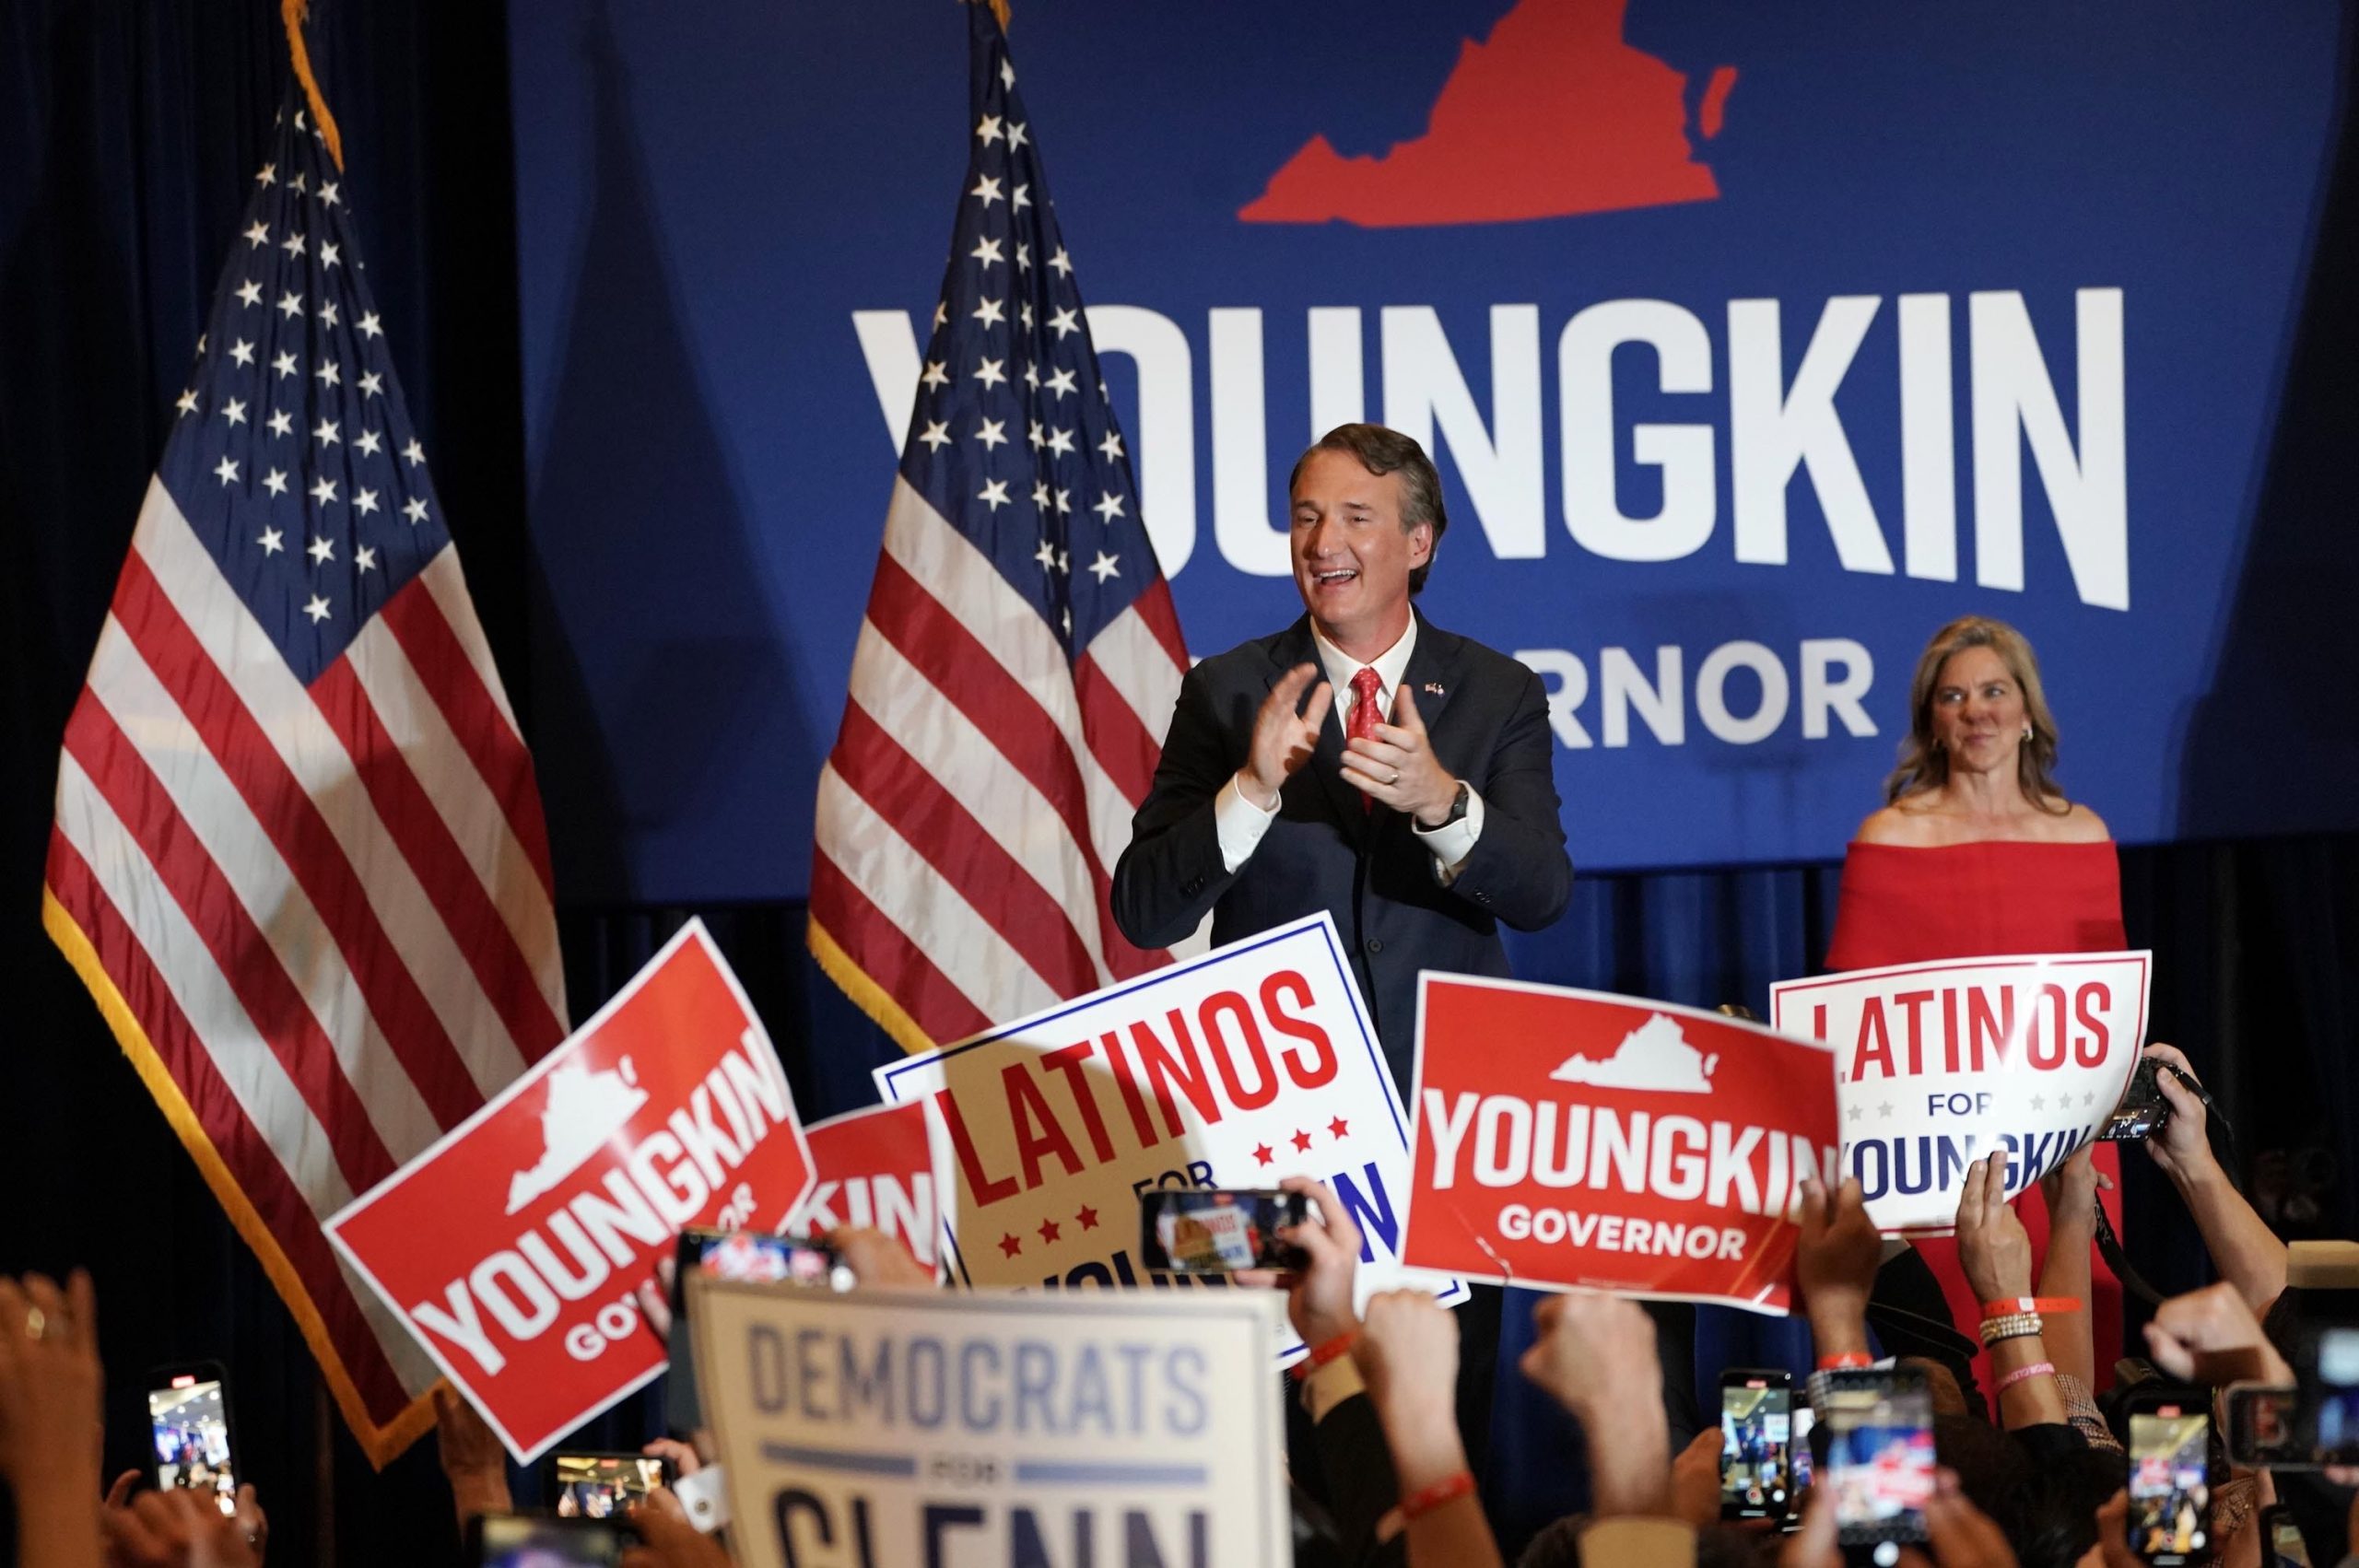 Who is Glenn Youngkin? Trump calls Virginia Governor ‘Chinese’